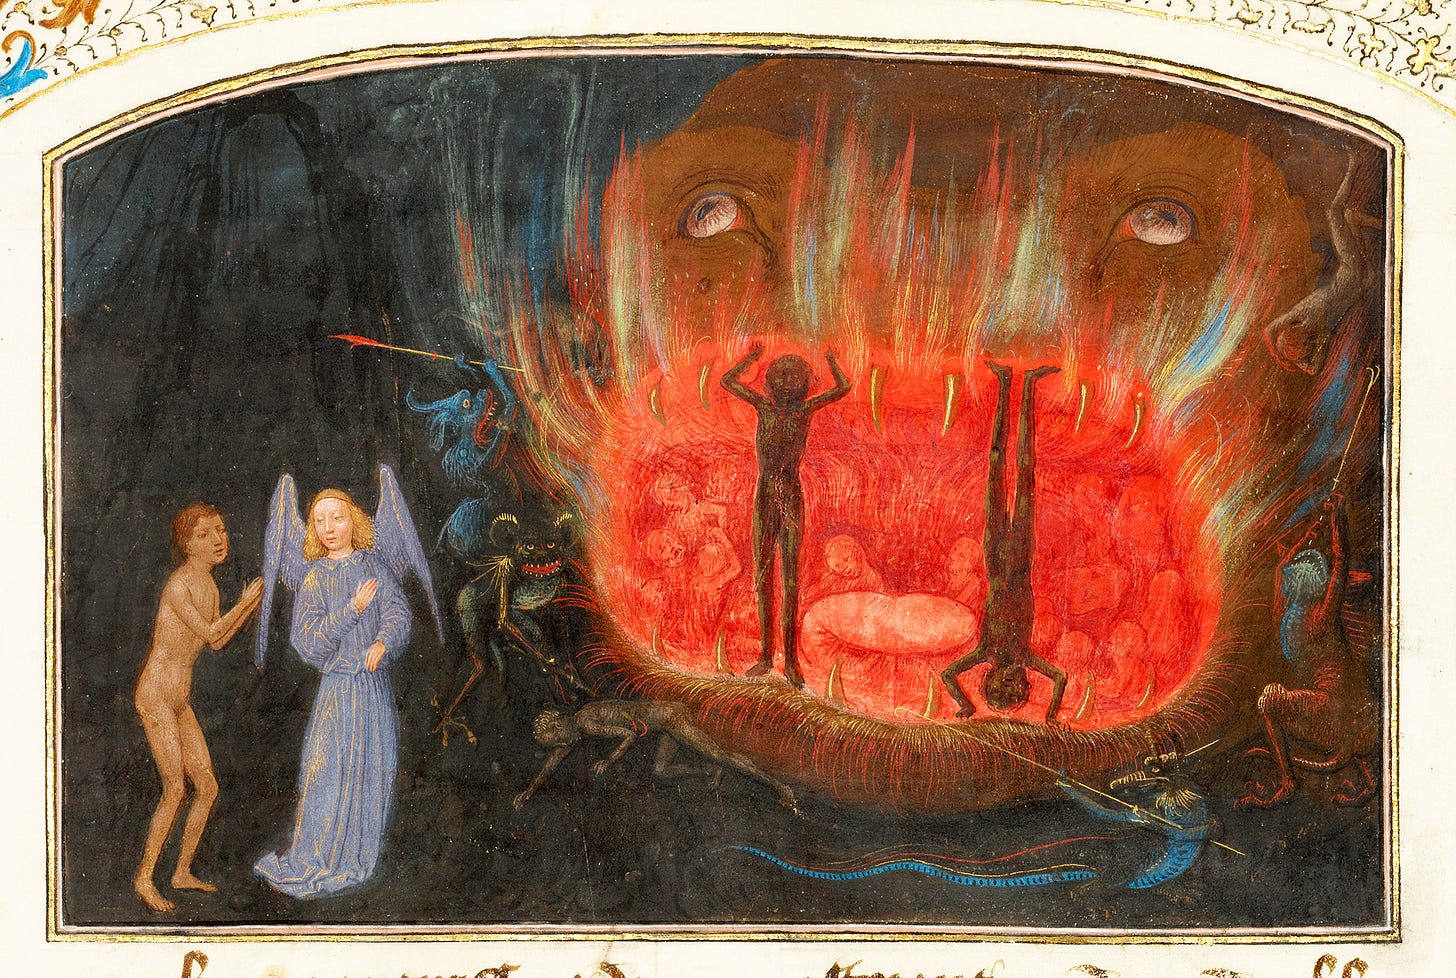 a page from an illustrated manuscript. it shows a dark image; to the left, a naked man presses his hands together in prayer before an angel, draped in blue. taking up the majority of the image is a large mouth of what appears to be an orange fish like creature. the mouth is burning red with flames rising up from it, and inside dim figures can be seen moving around. the mouth is propped open by two figures, one standing upright, its arms aloft, the other standing on its head, holding the mouth open with its feet. they are cast in shadow by the flames from the creature’s mouth. all around them, demonic figures laugh and prod at them with spears.